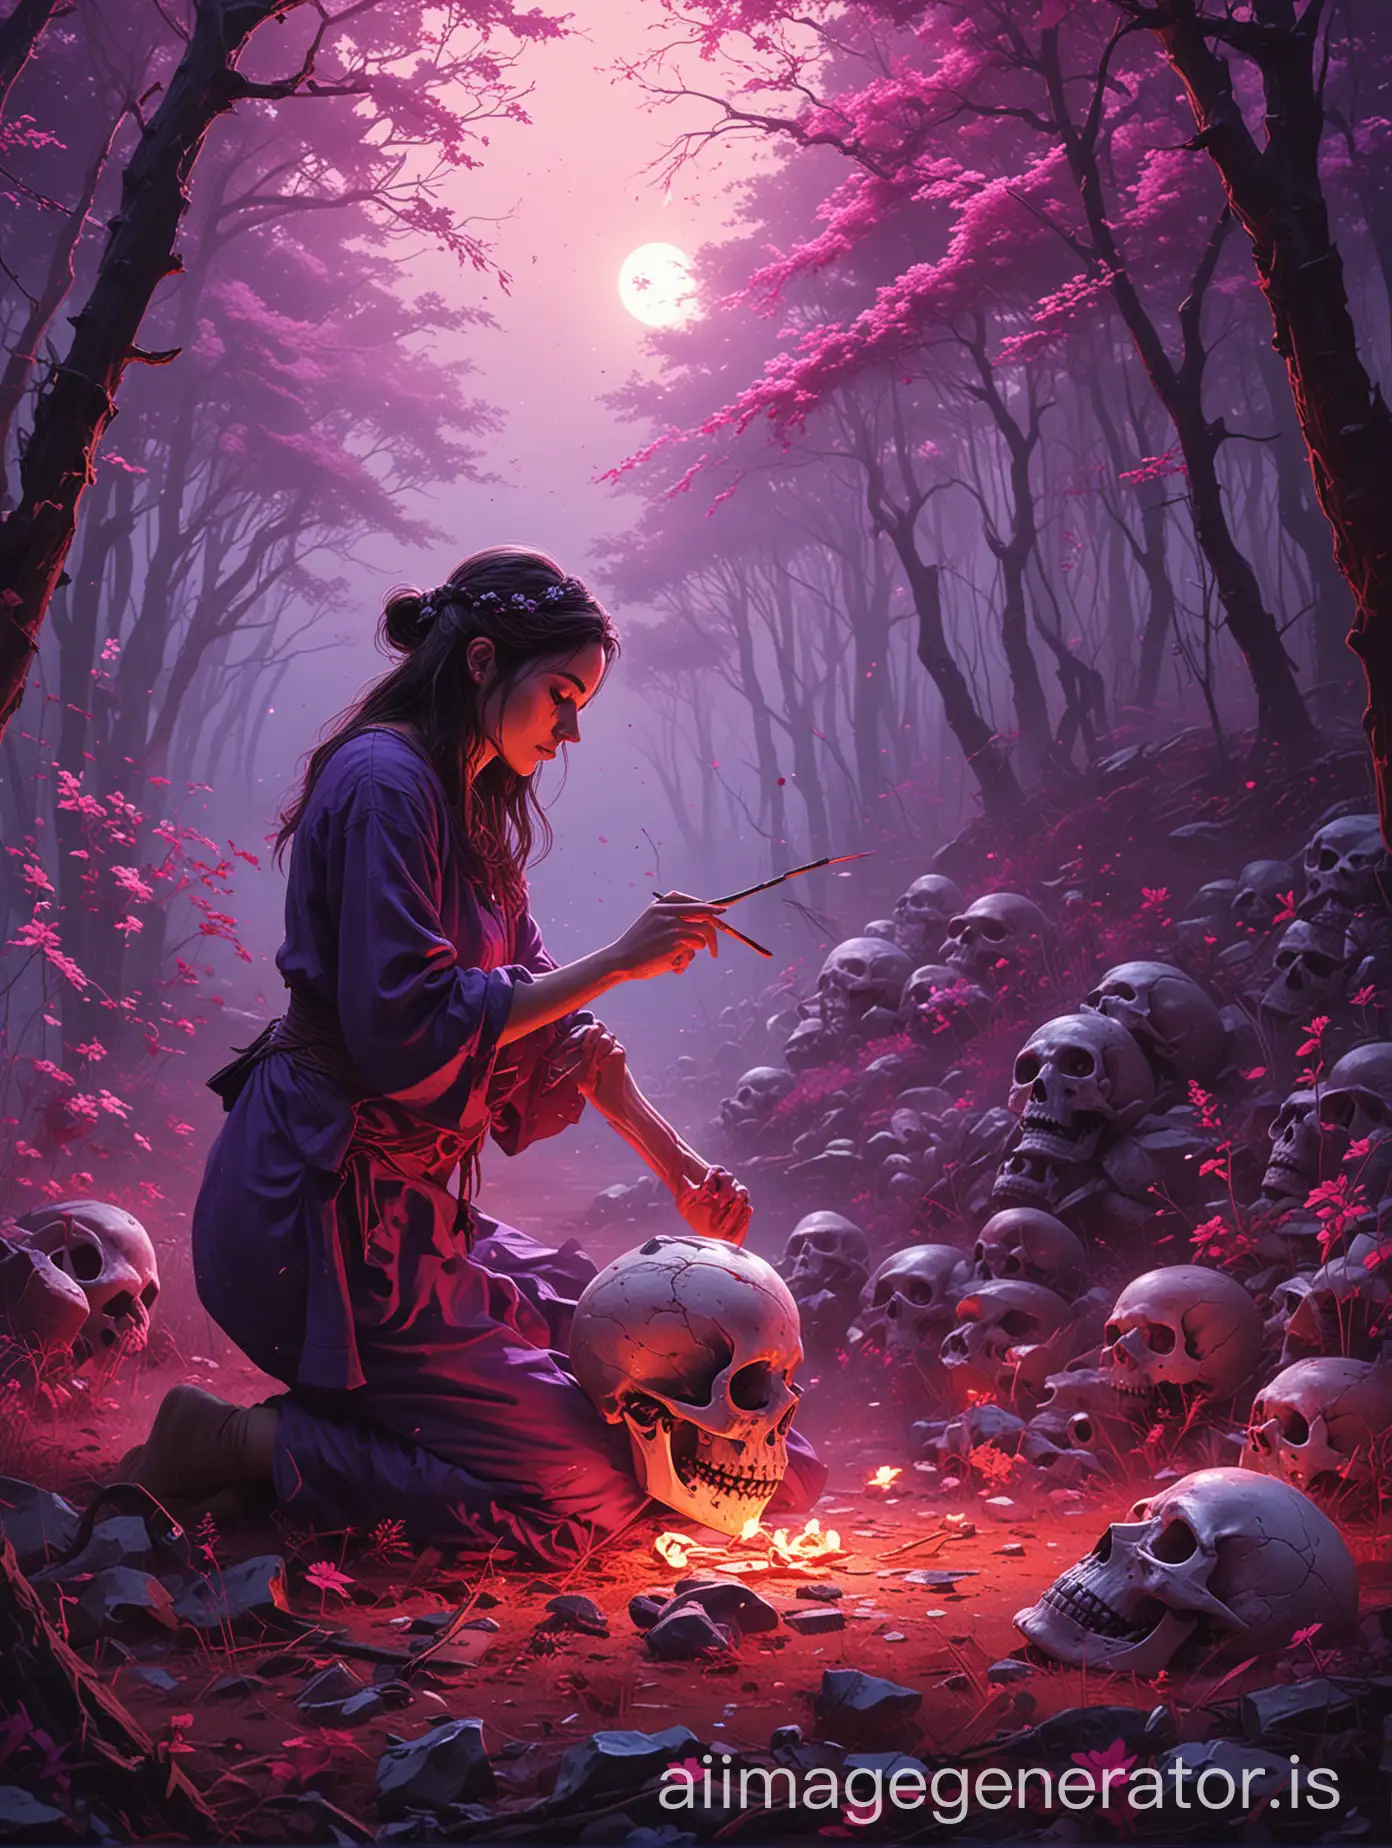 a painting of a female anthropologist uncovering a skull in a hero pose, dream scenery art, anato finnstark and alena aenami, purple and pink colors, art of alena aenami, alena aenami and android jones, 8k stunning artwork, dia de los muertos style, mexican art style, epic digital art illustration, in the style dan mumford artwork, beautiful digital artwork, beautiful art uhd 4 k, mind-bending digital art, Alena Aenami, painting by dan mumford, by Alena Aenami, breathtaking digital art, makoto shinkai cyril rolando, inspired by Cyril Rolando, inspiring digital art, intricate digital painting, digital artwork 4 k